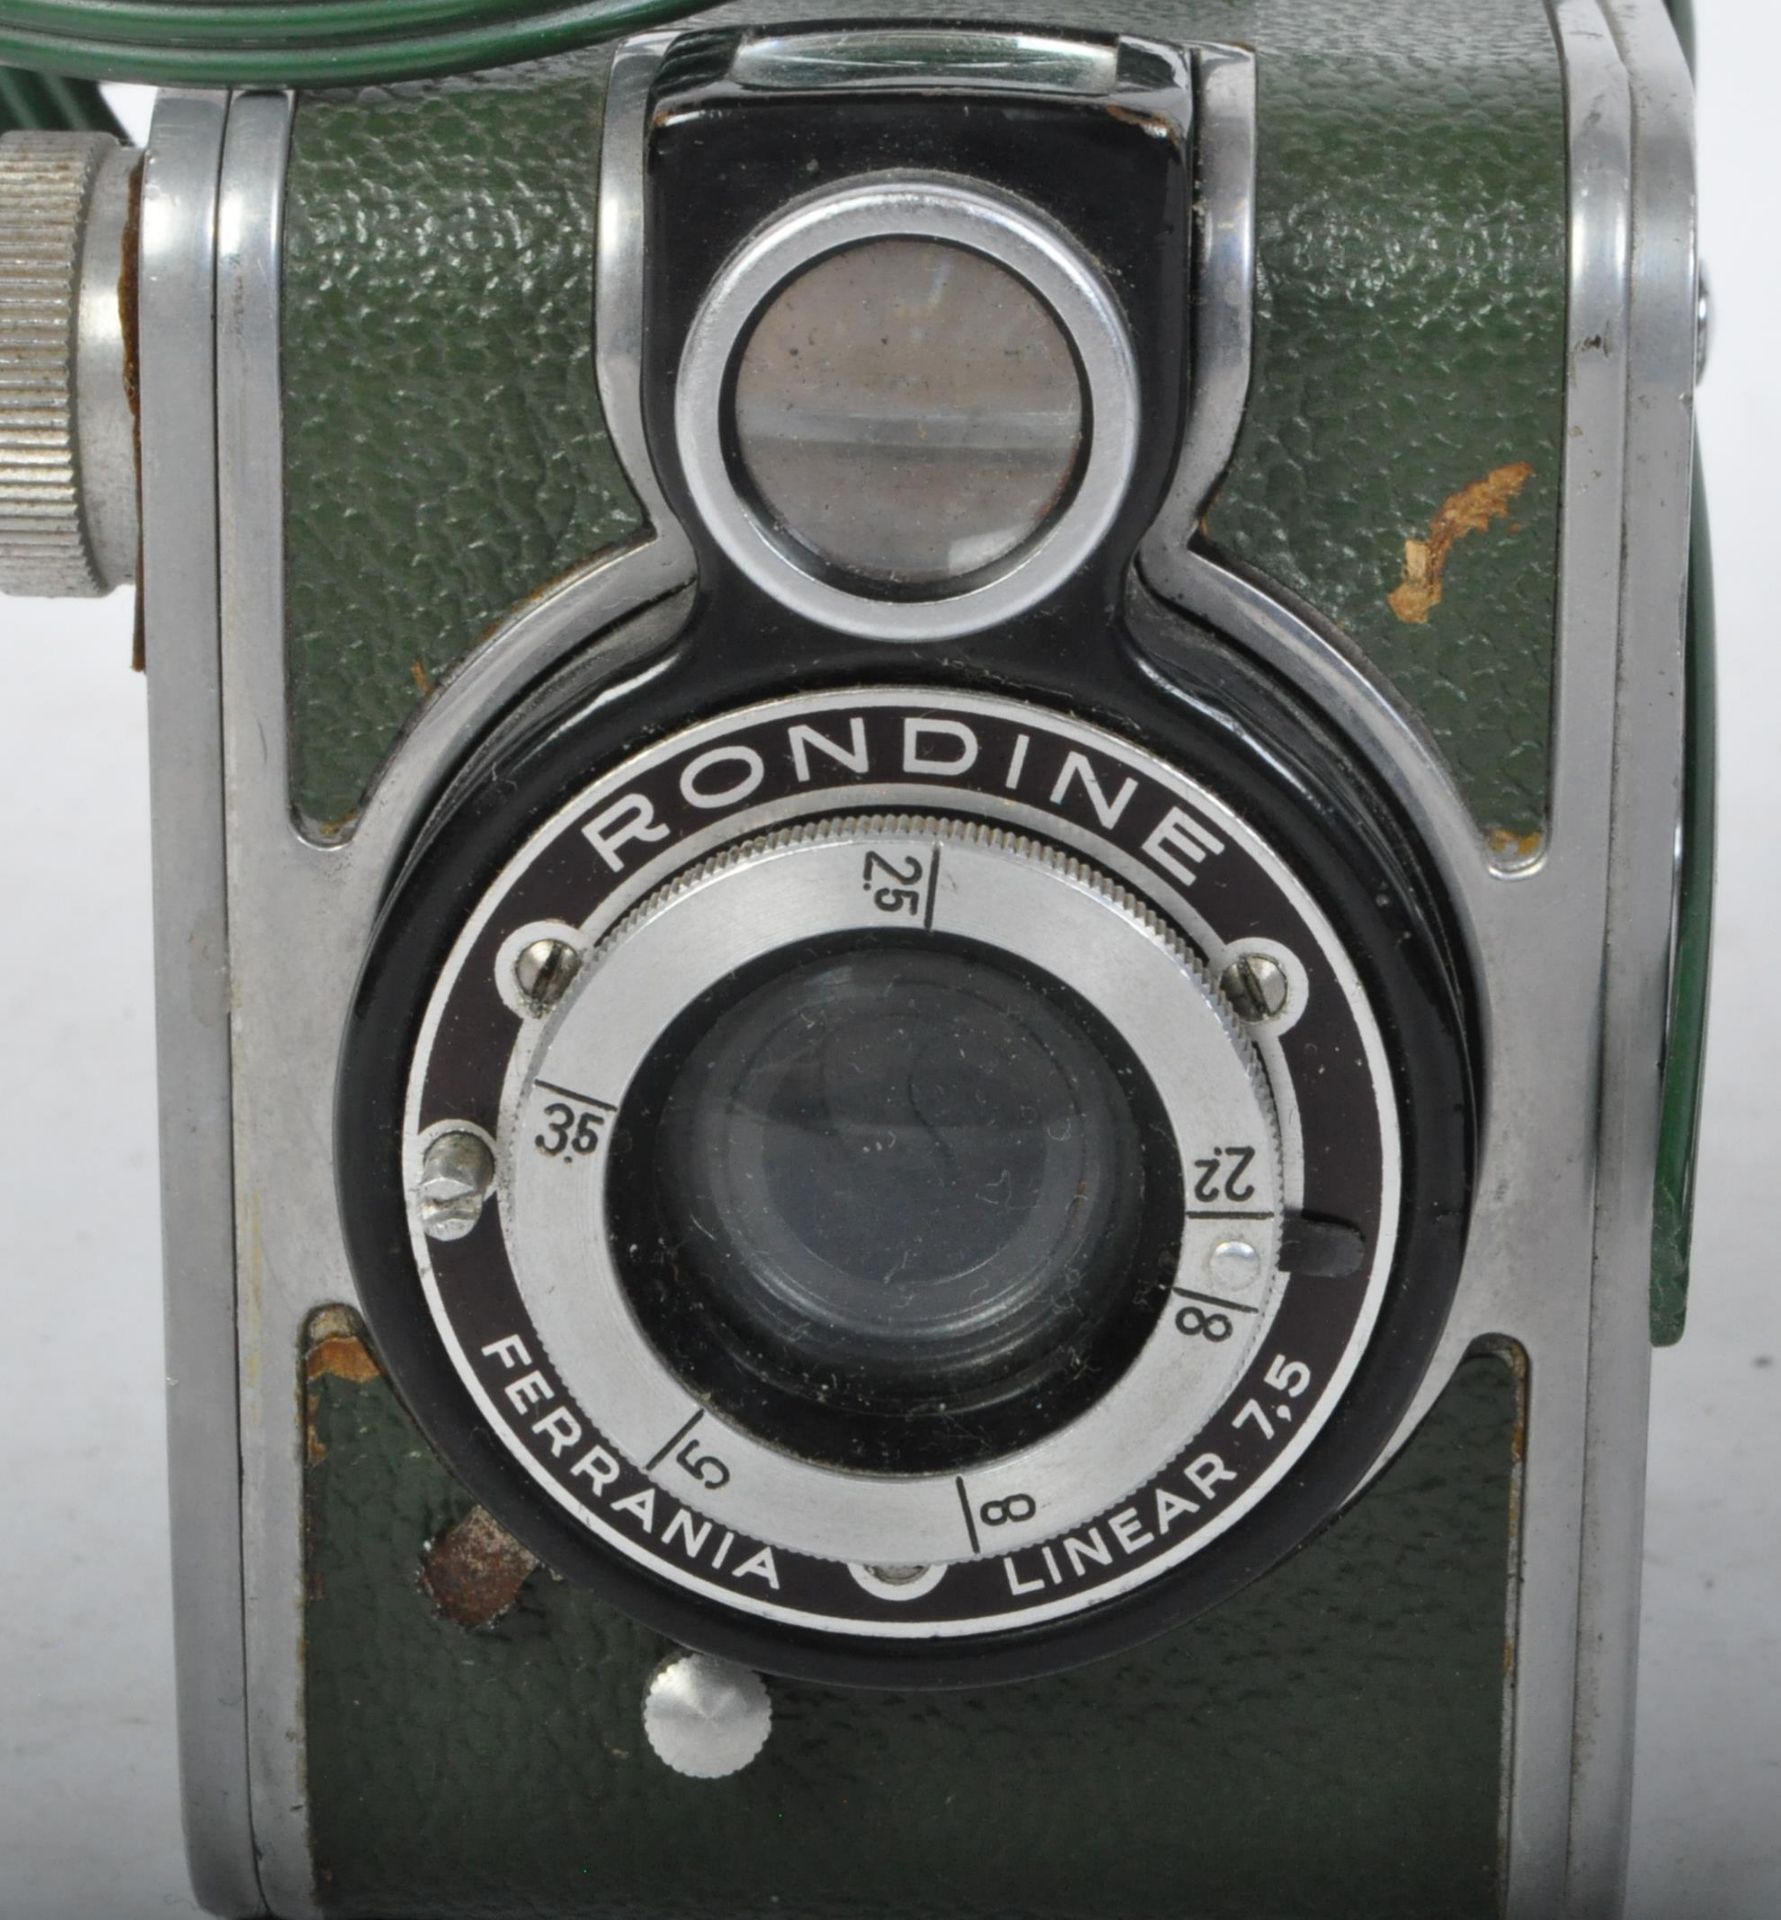 VINTAGE OLYMPUS PEN-D CAMERA WITH RONDINE BOX CAMERA - Image 2 of 5